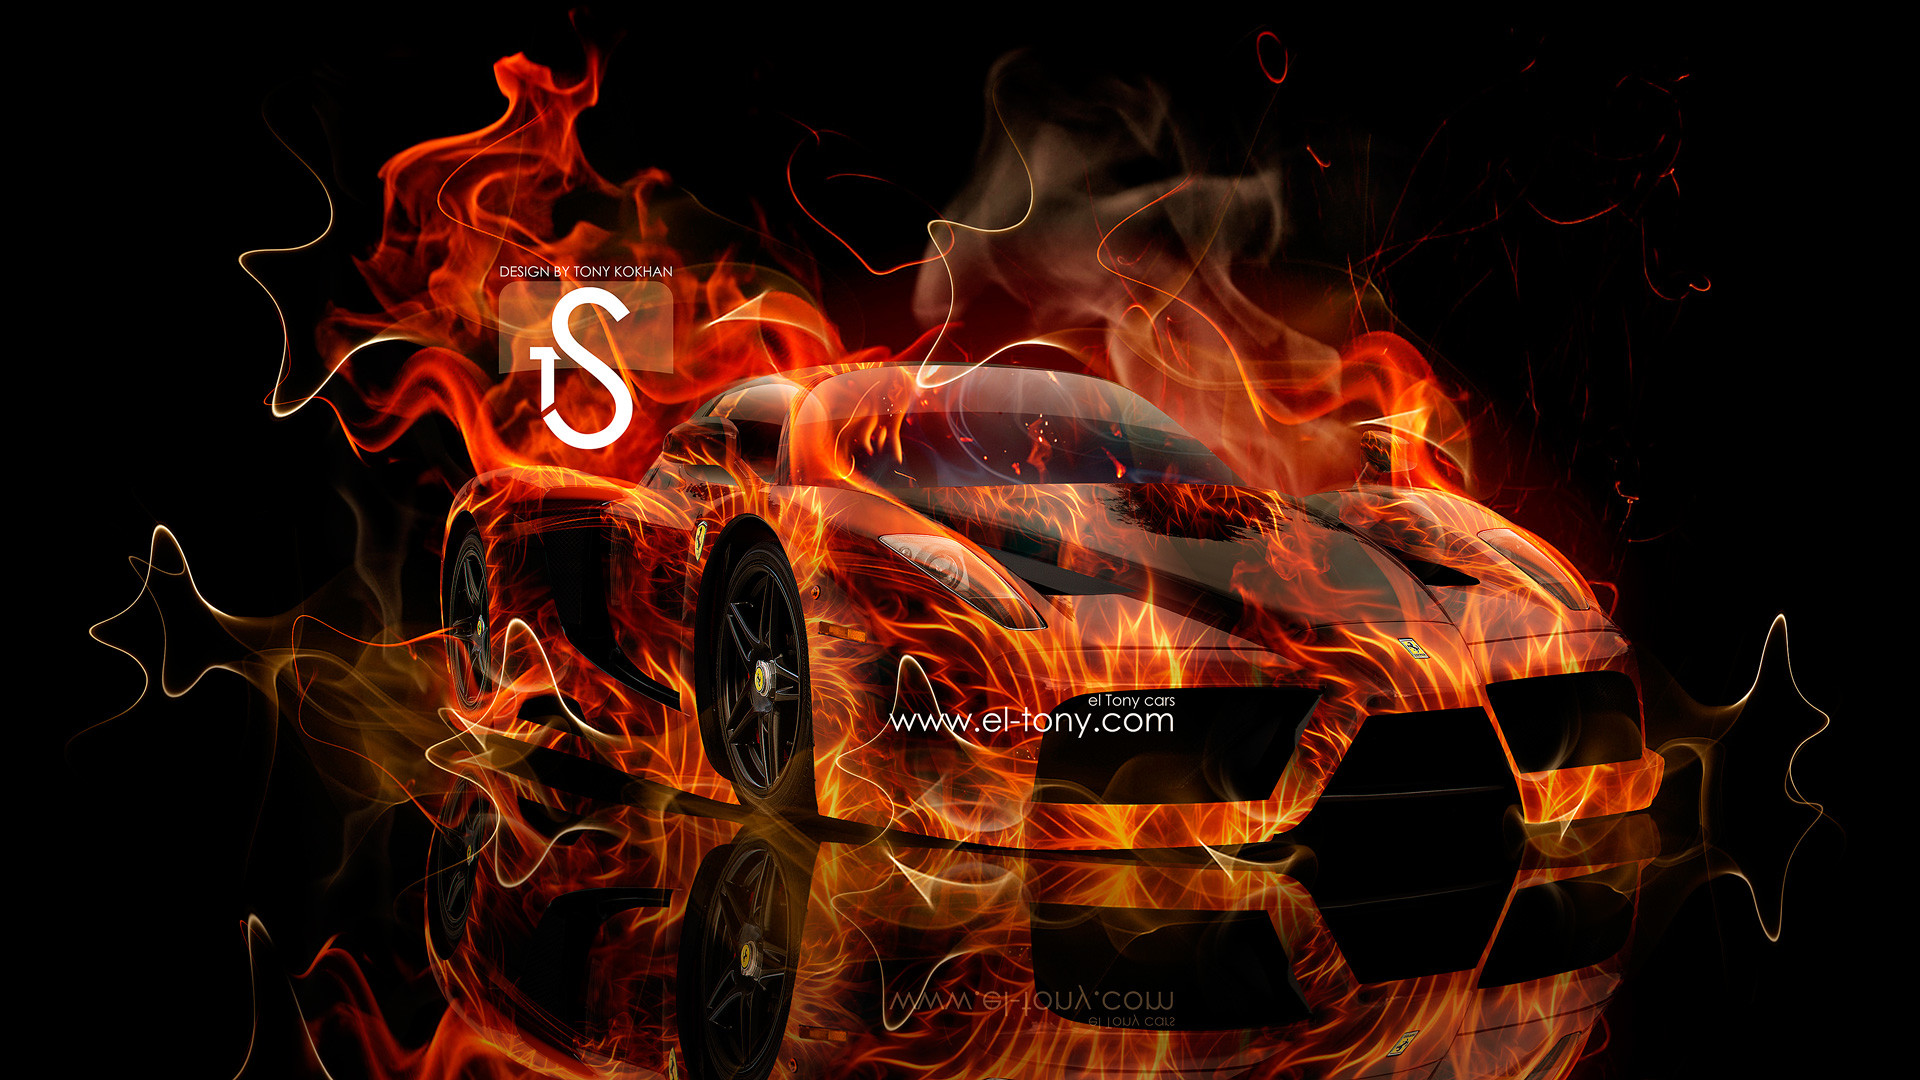 Fire 3d wallpapers of cars for desktop  Cool car pictures Cool wallpapers  cars Cool car wallpapers hd